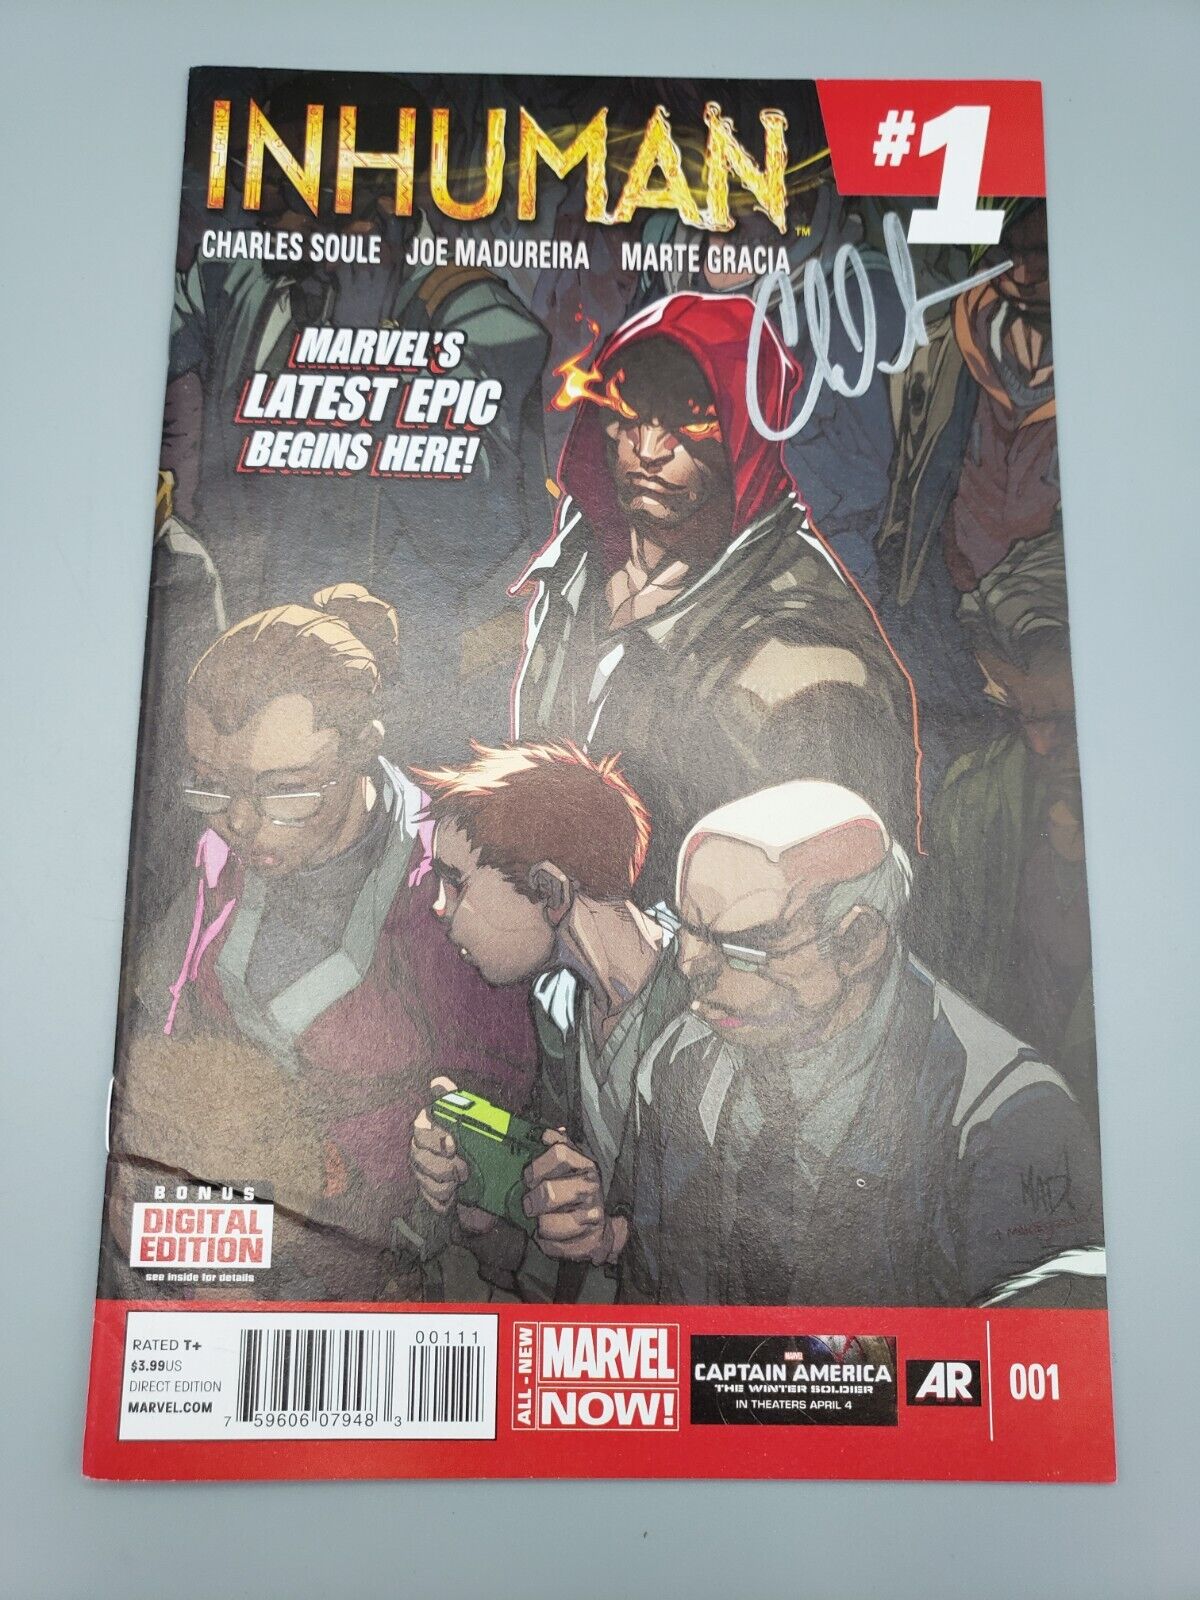 Inhuman Vol 1 #1 June 2014 Variant Cover Autographed Published By Marvel Comics